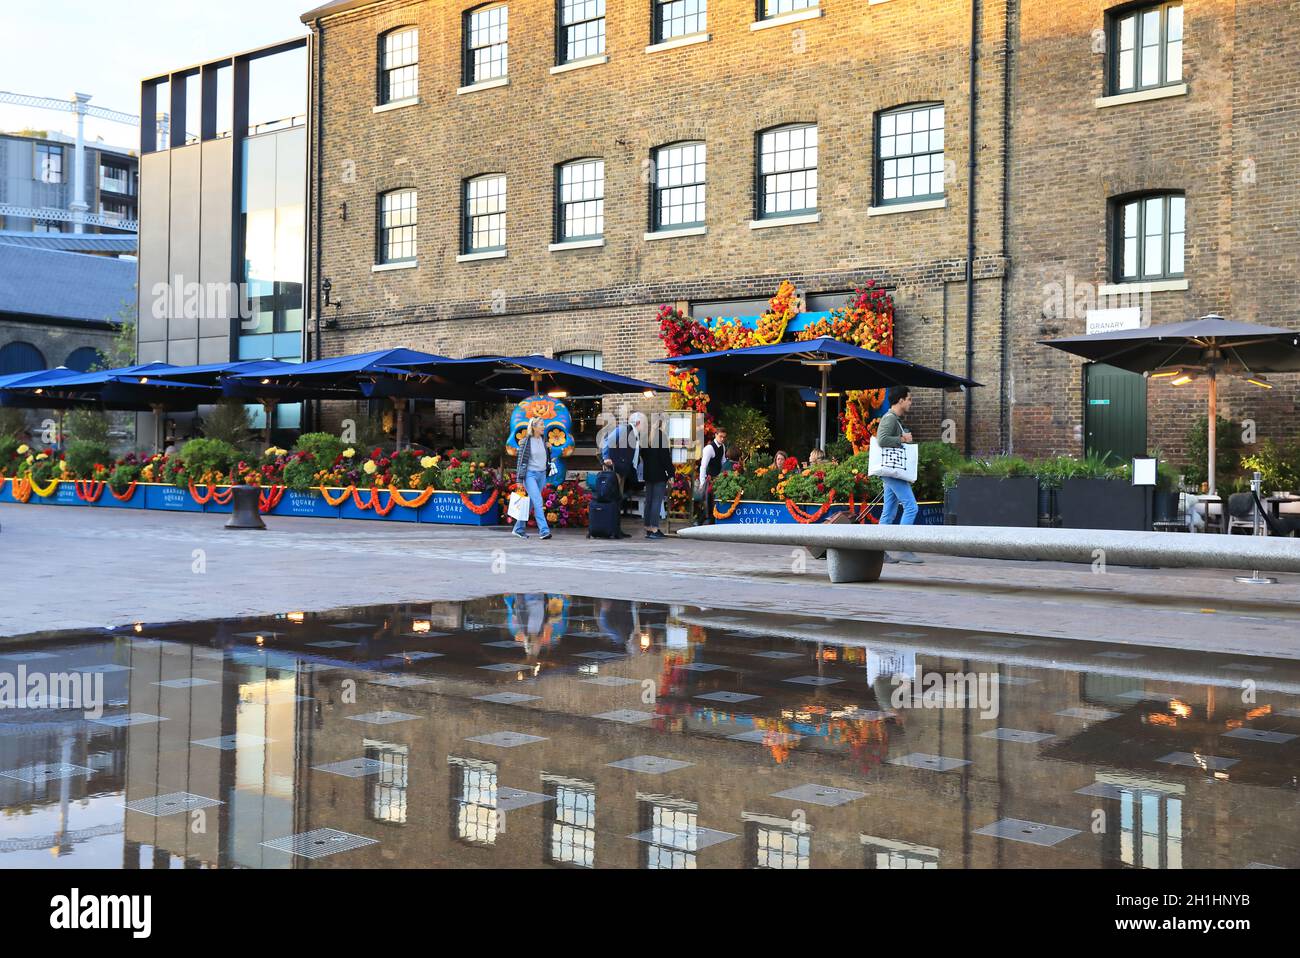 The Granary Square Brasserie underneath St Martins Central School of Art in the autumn sunshine, at Kings Cross, north London, UK Stock Photo